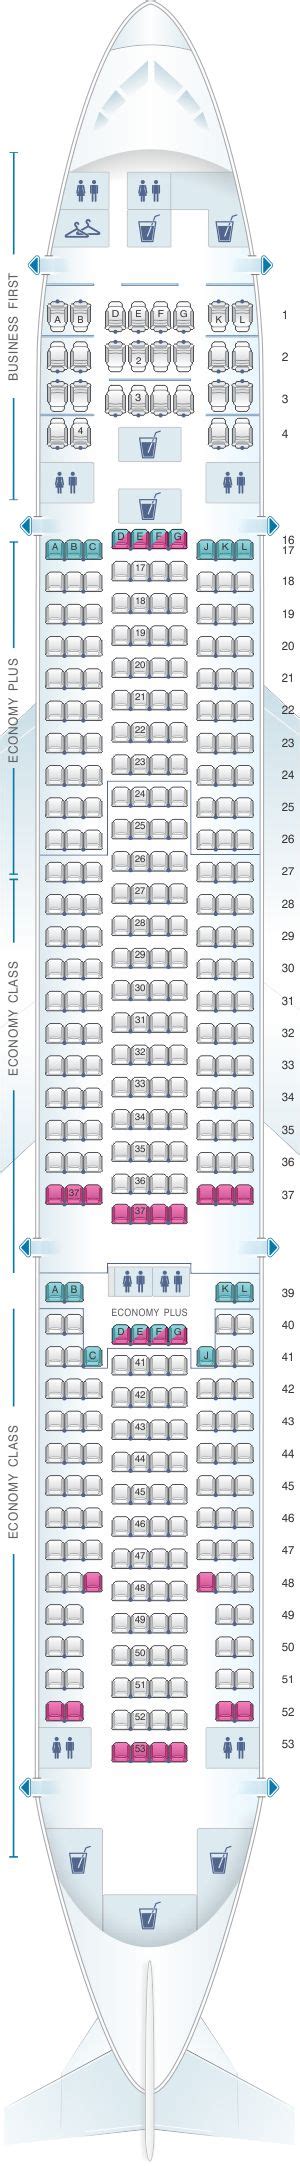 The Seating Chart For An Airliners Flight Deck With Several Seats And